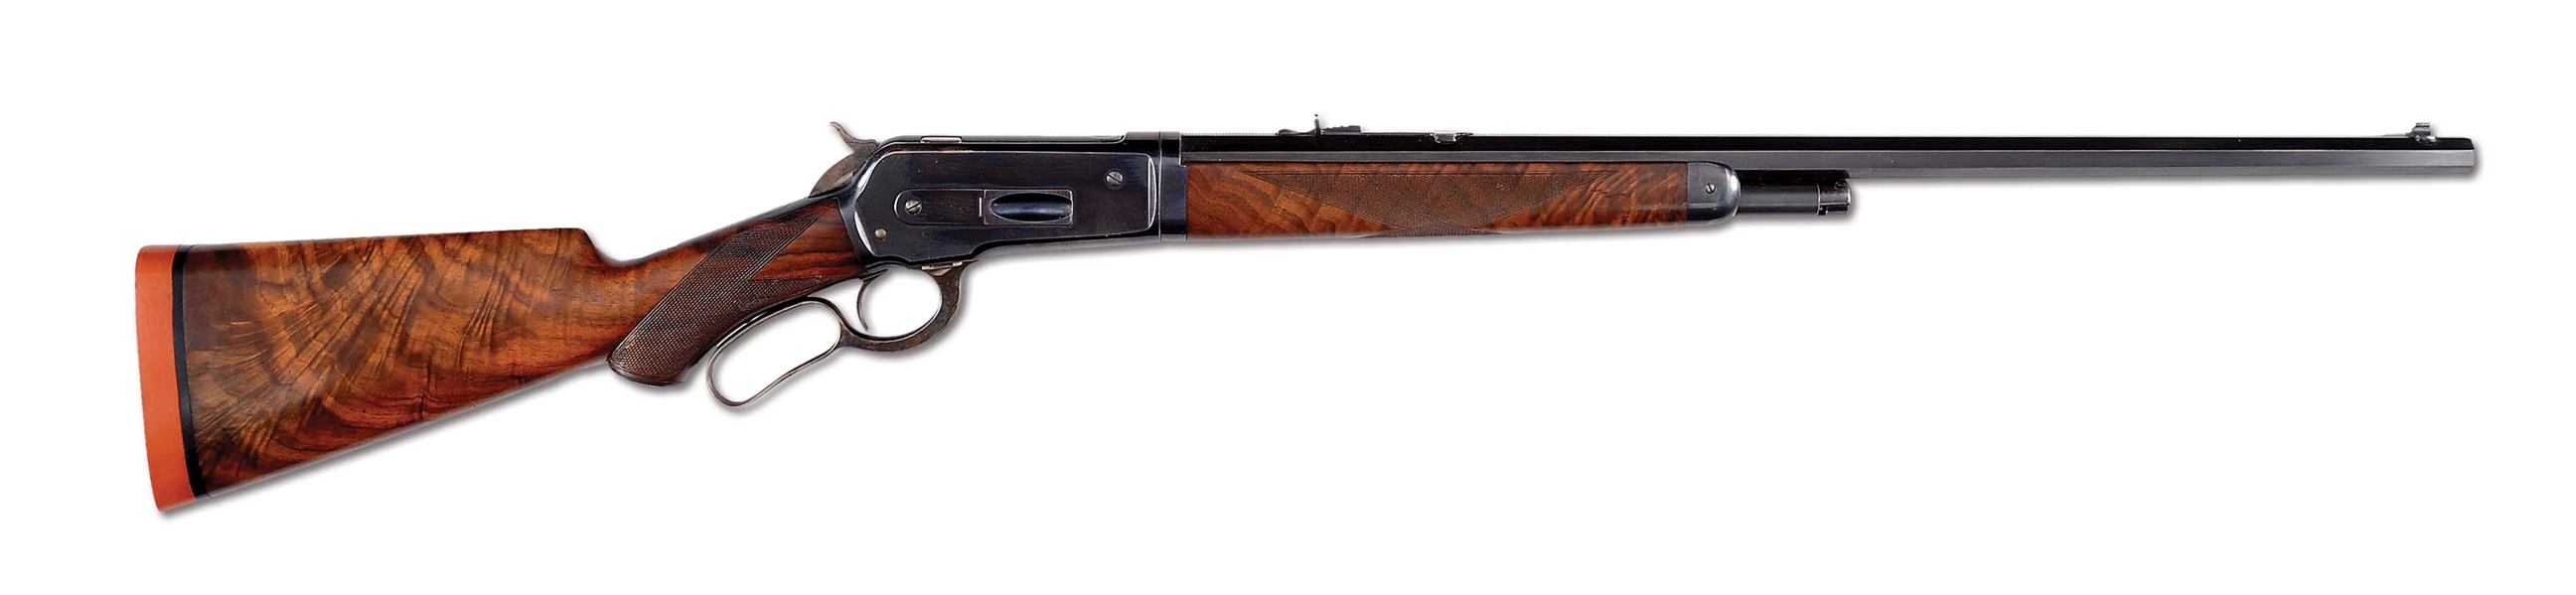 (C) FANTASTIC WINCHESTER MODEL 1886 DELUXE RIFLE WITH MATTED BARREL (1900).